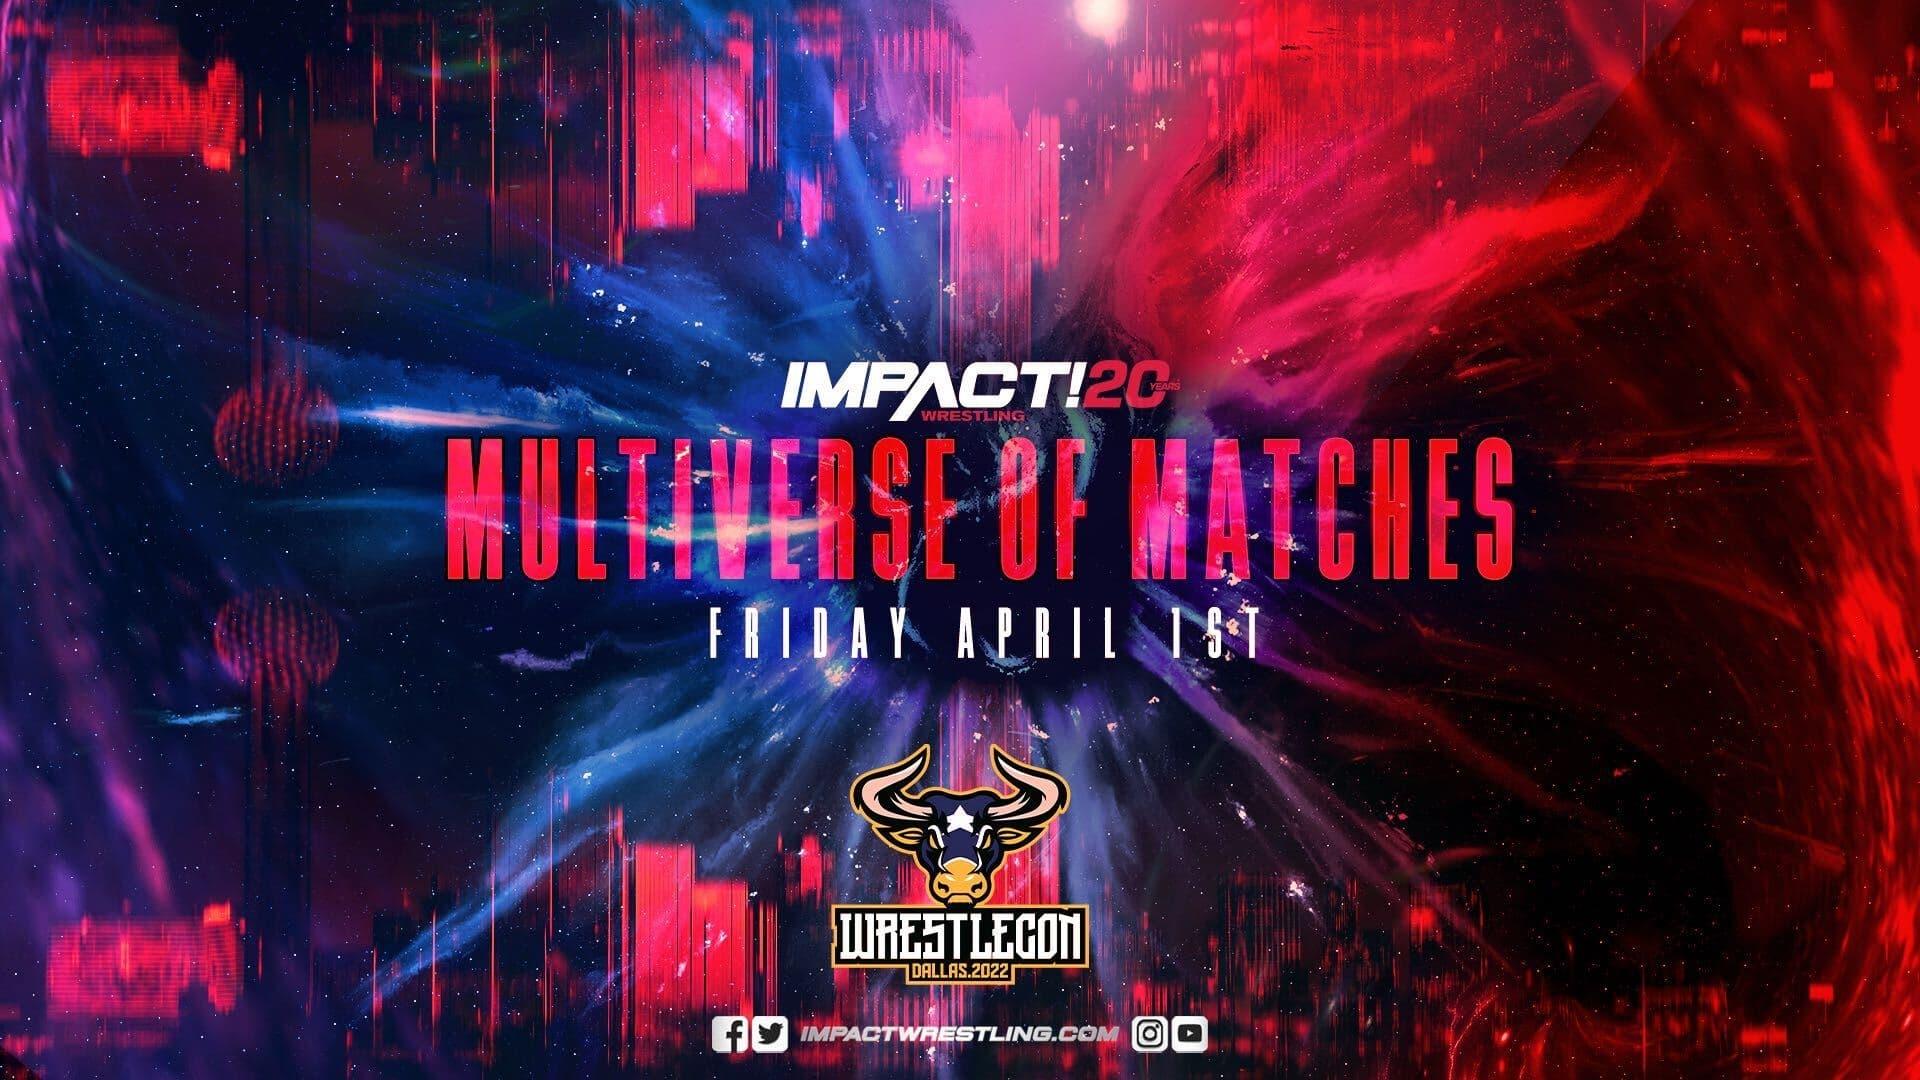 IMPACT Wrestling: Multiverse of Matches backdrop